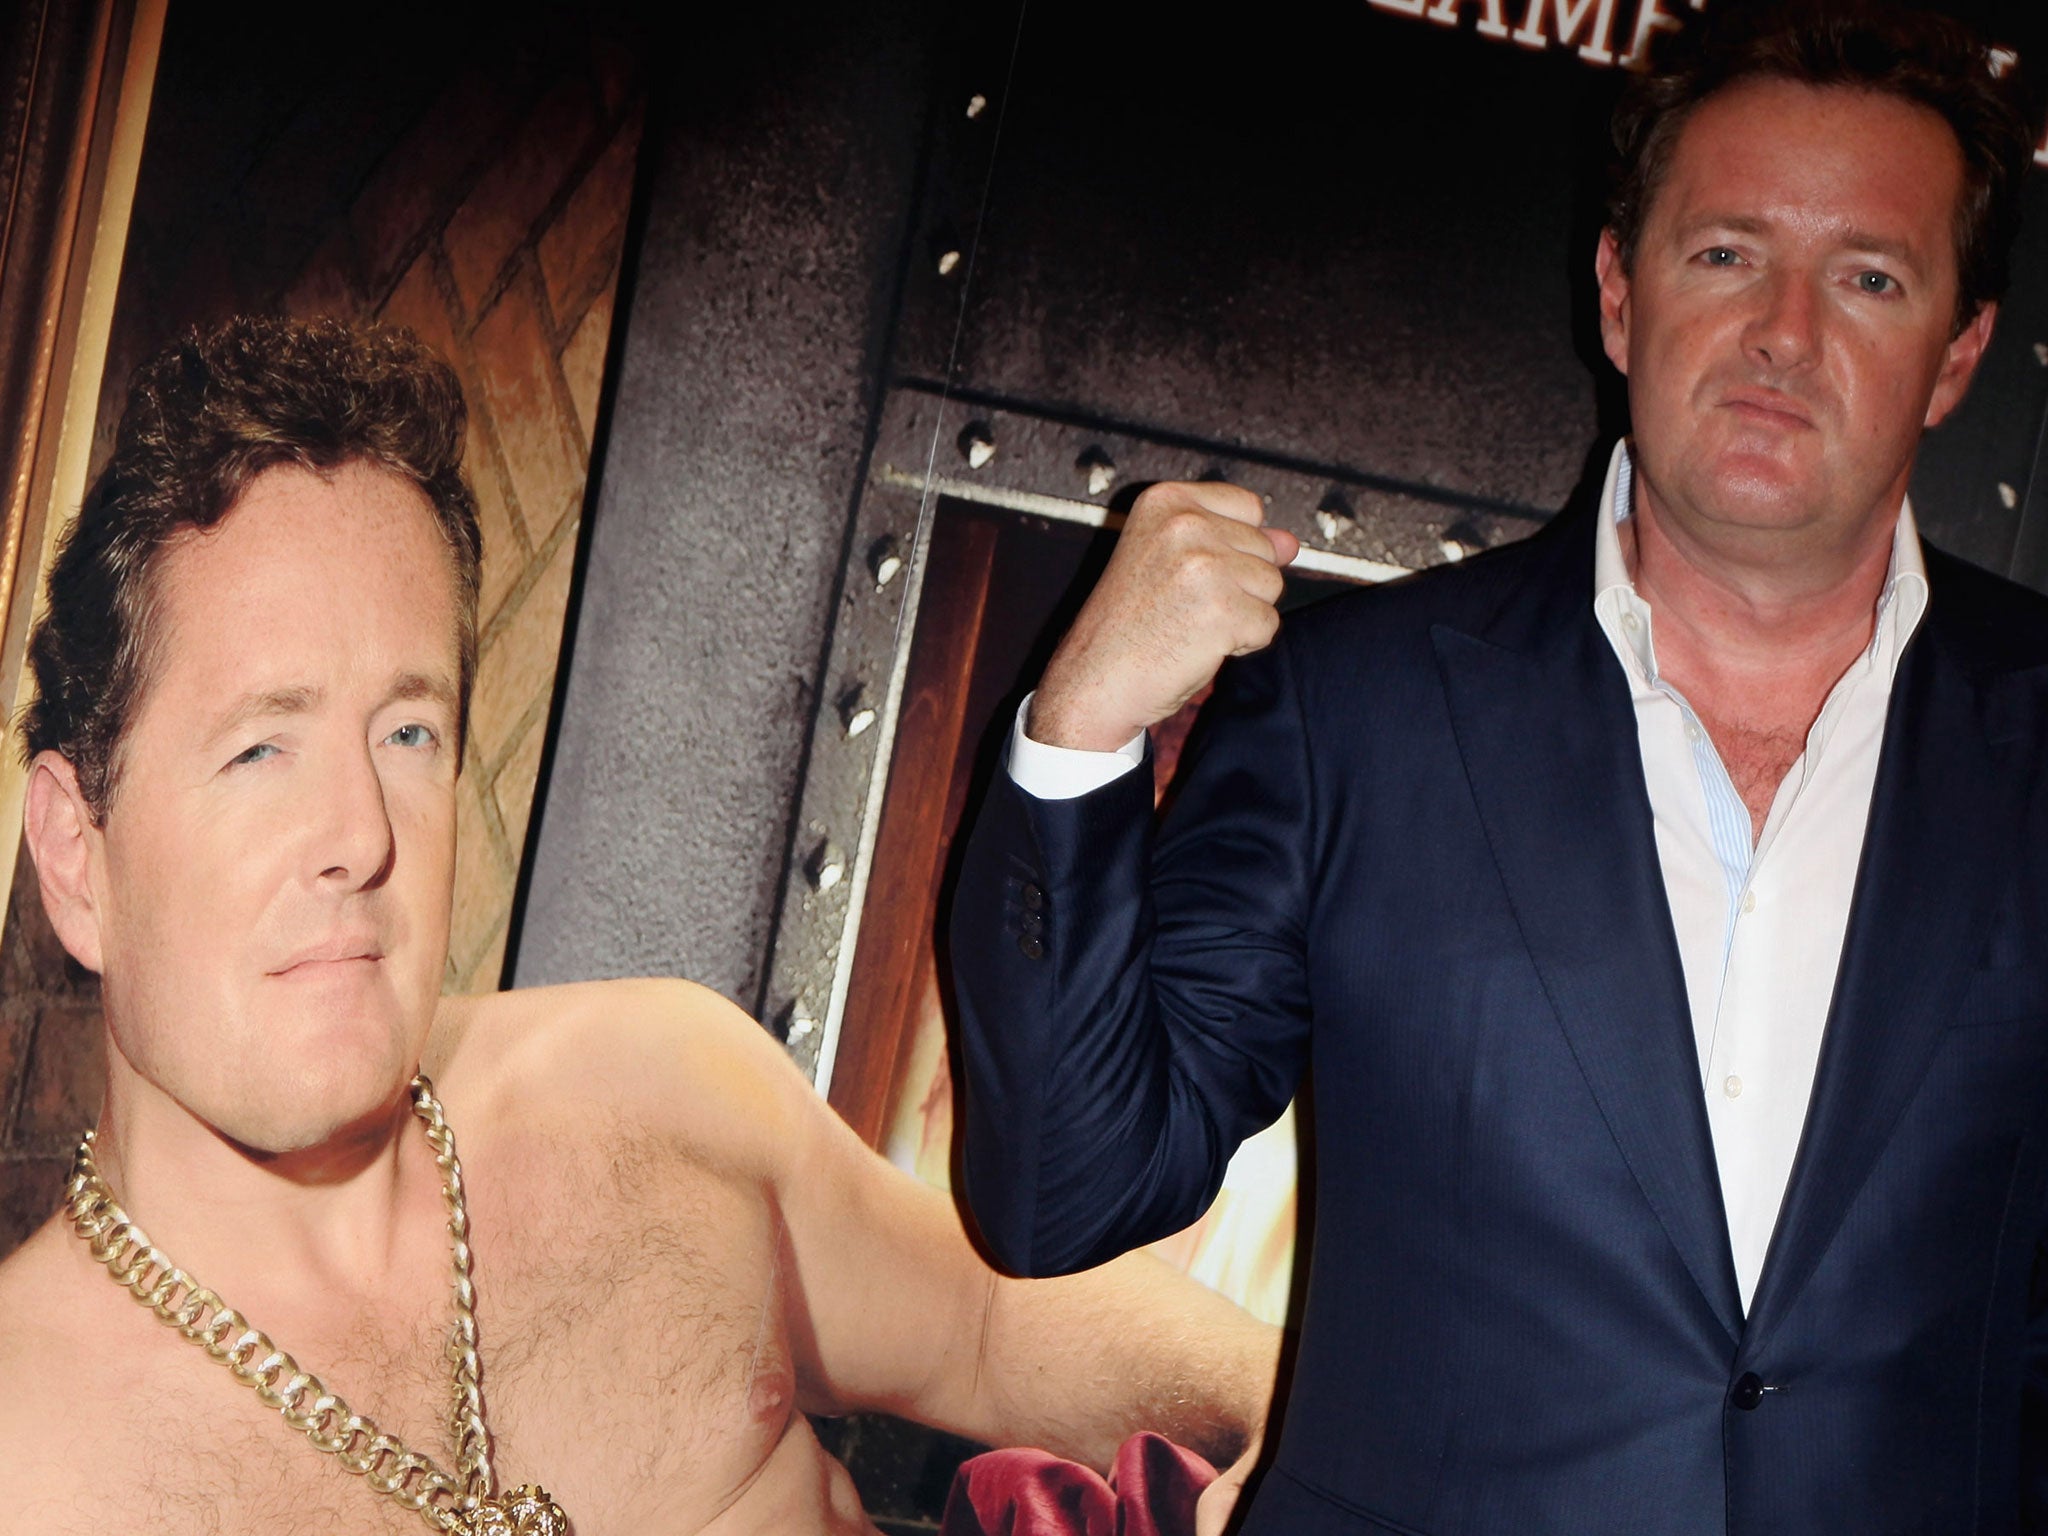 Piers Morgan attends a photocall for the new Burger King fragrance 'Flame' at Selfridges on June 15, 2009 in London, England.